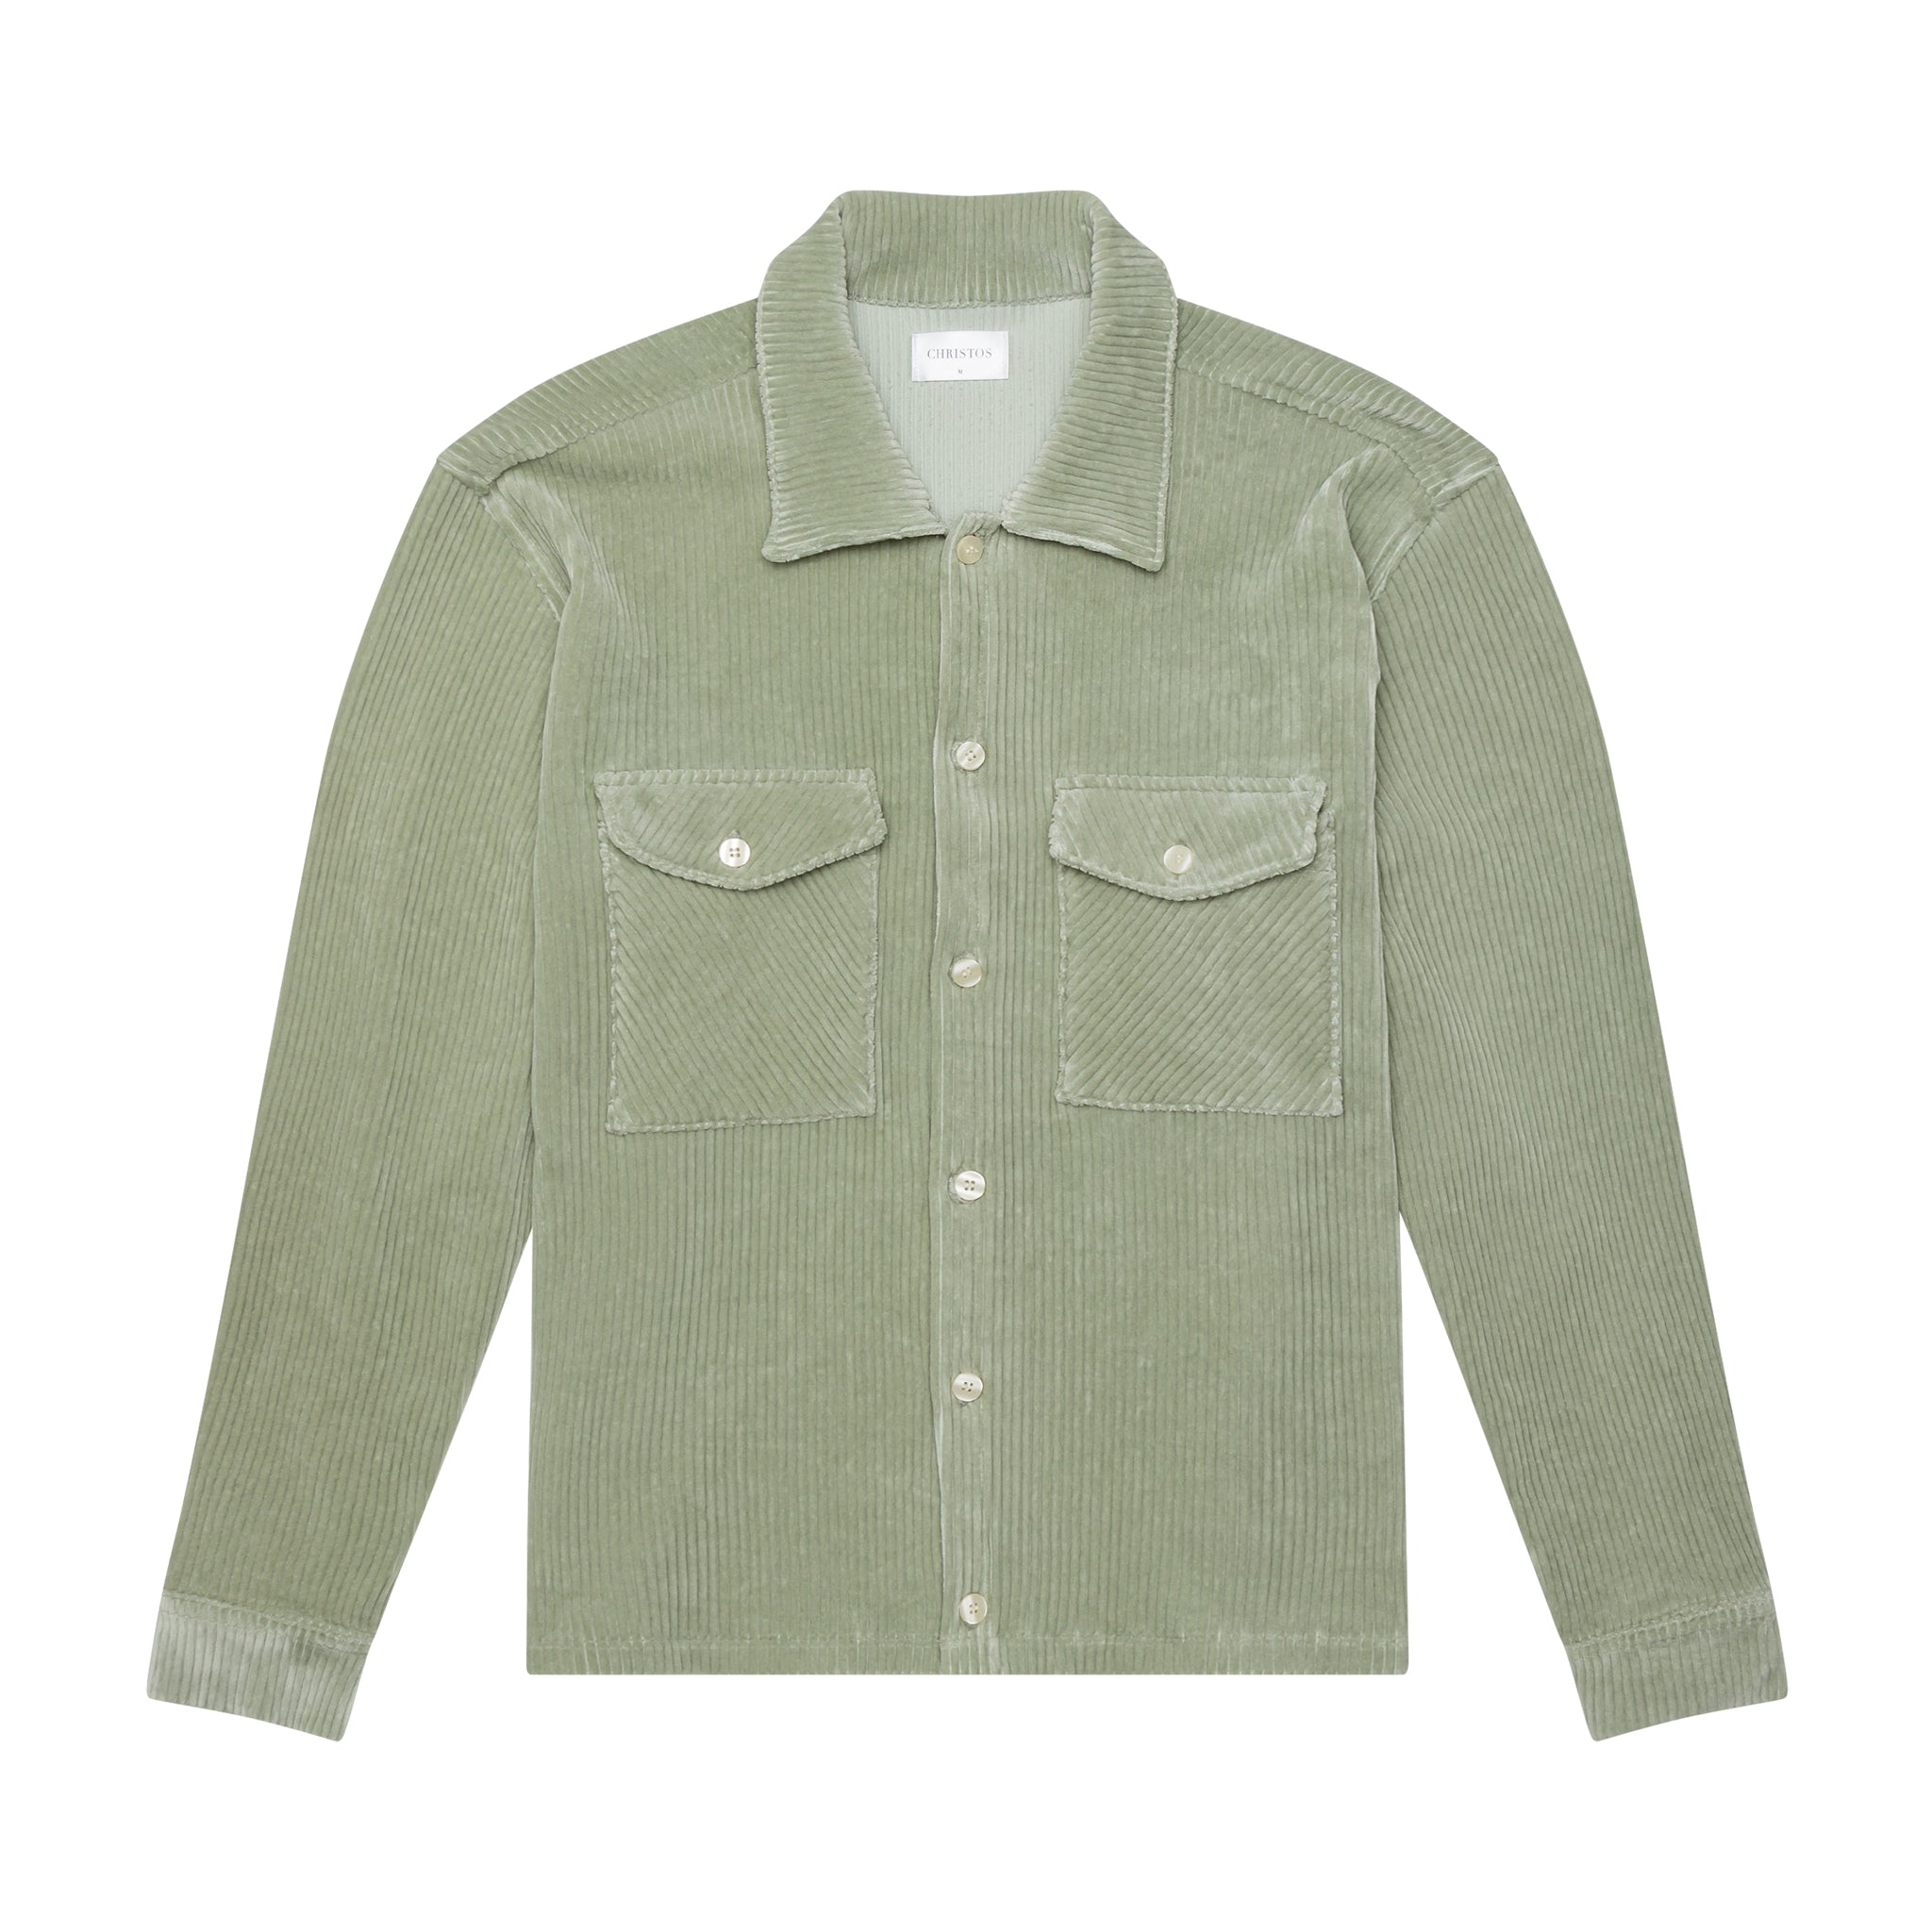 THE LUXE WORK SHIRT - SAGE